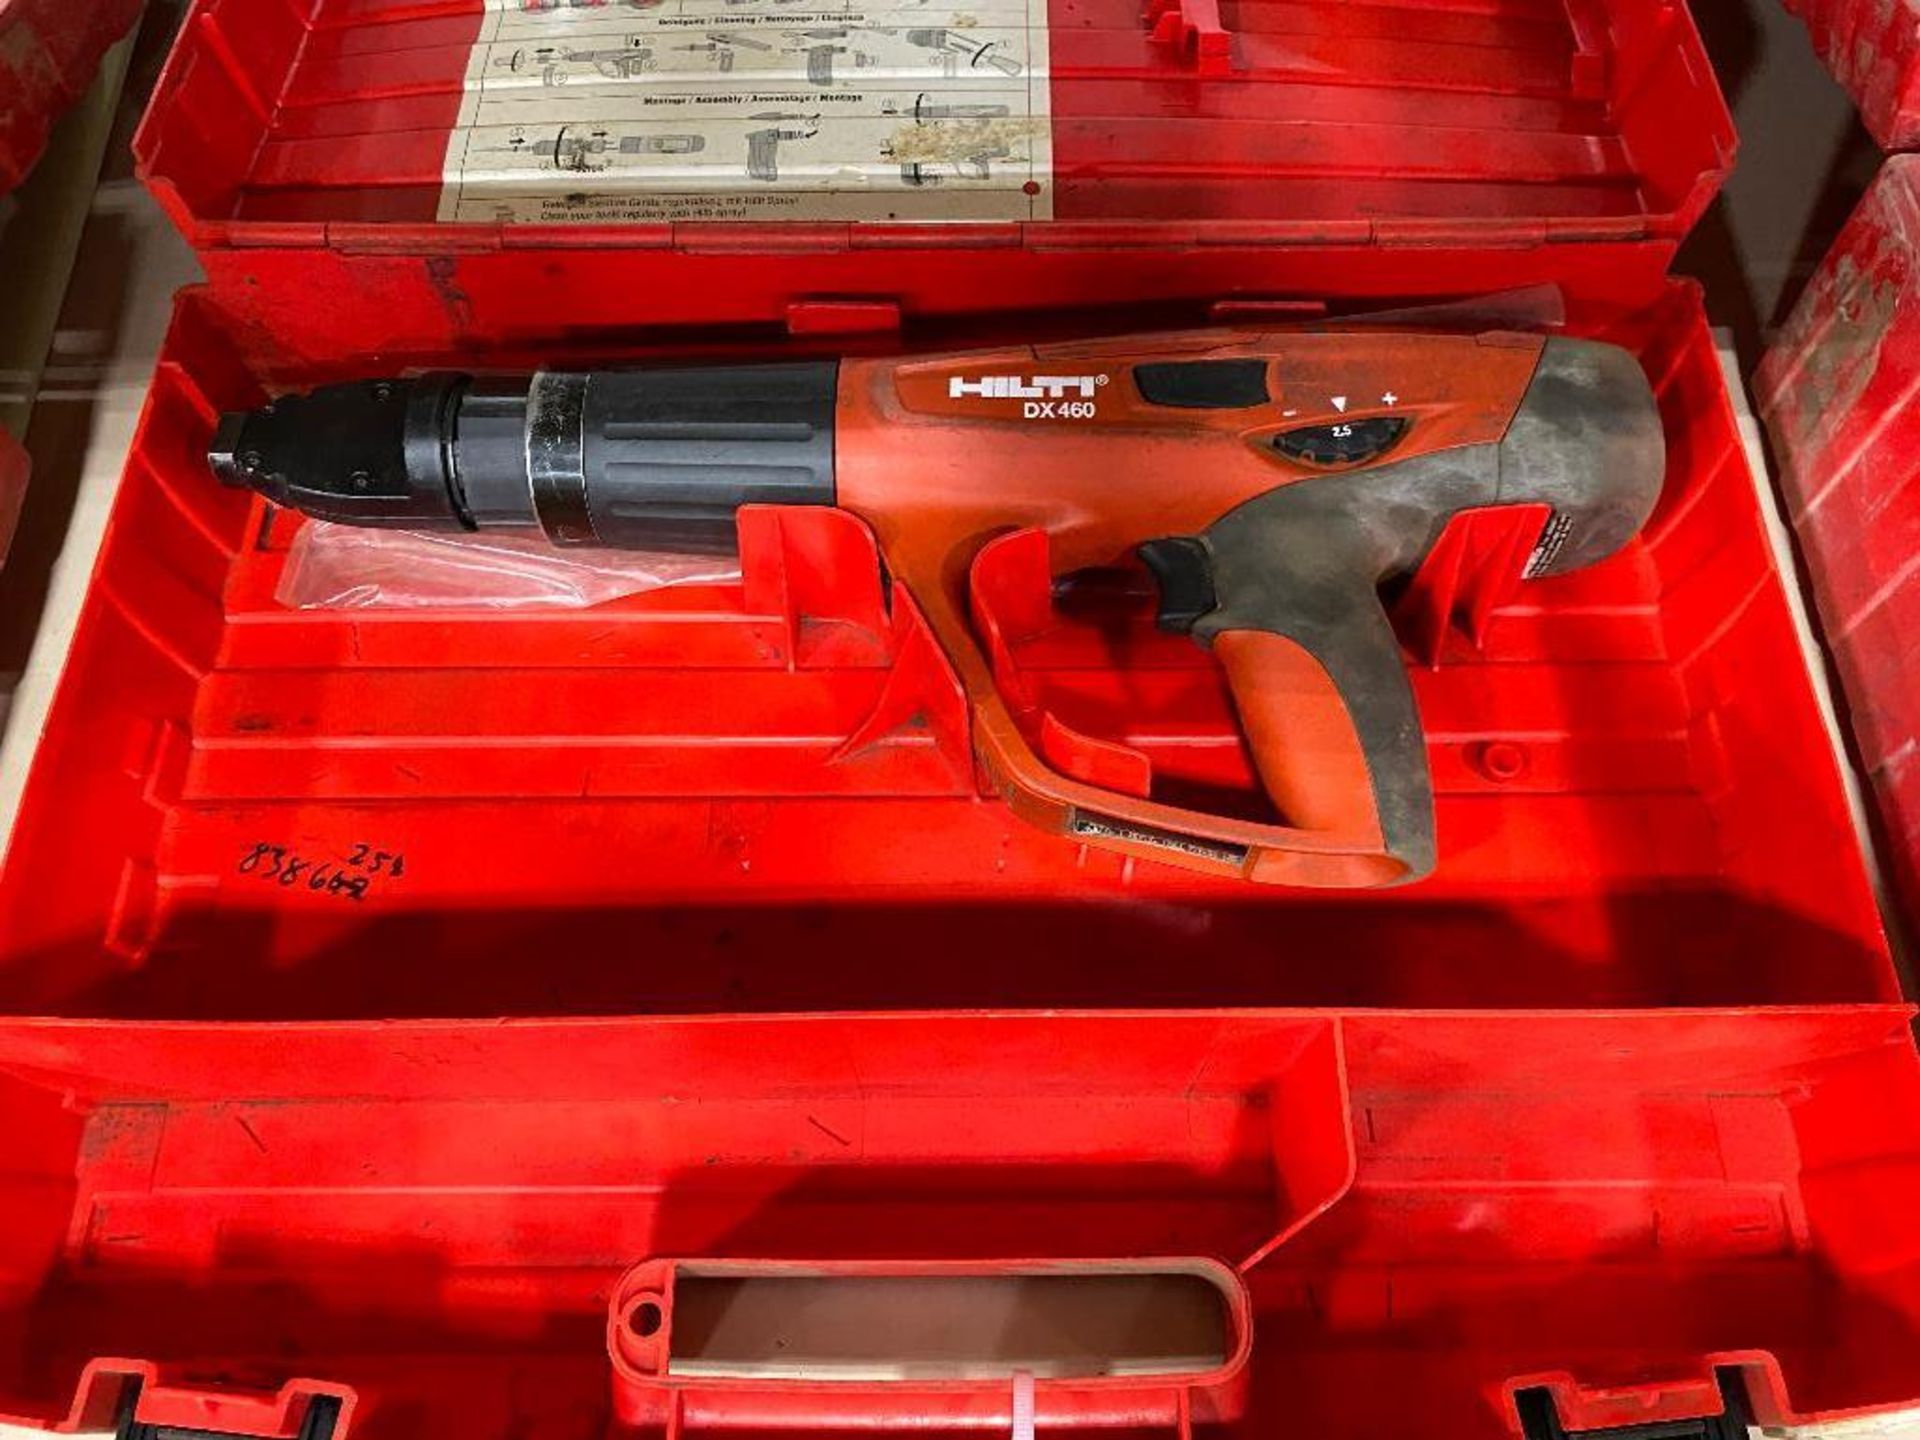 Hilti DX 460 Powder-Actuated Tool